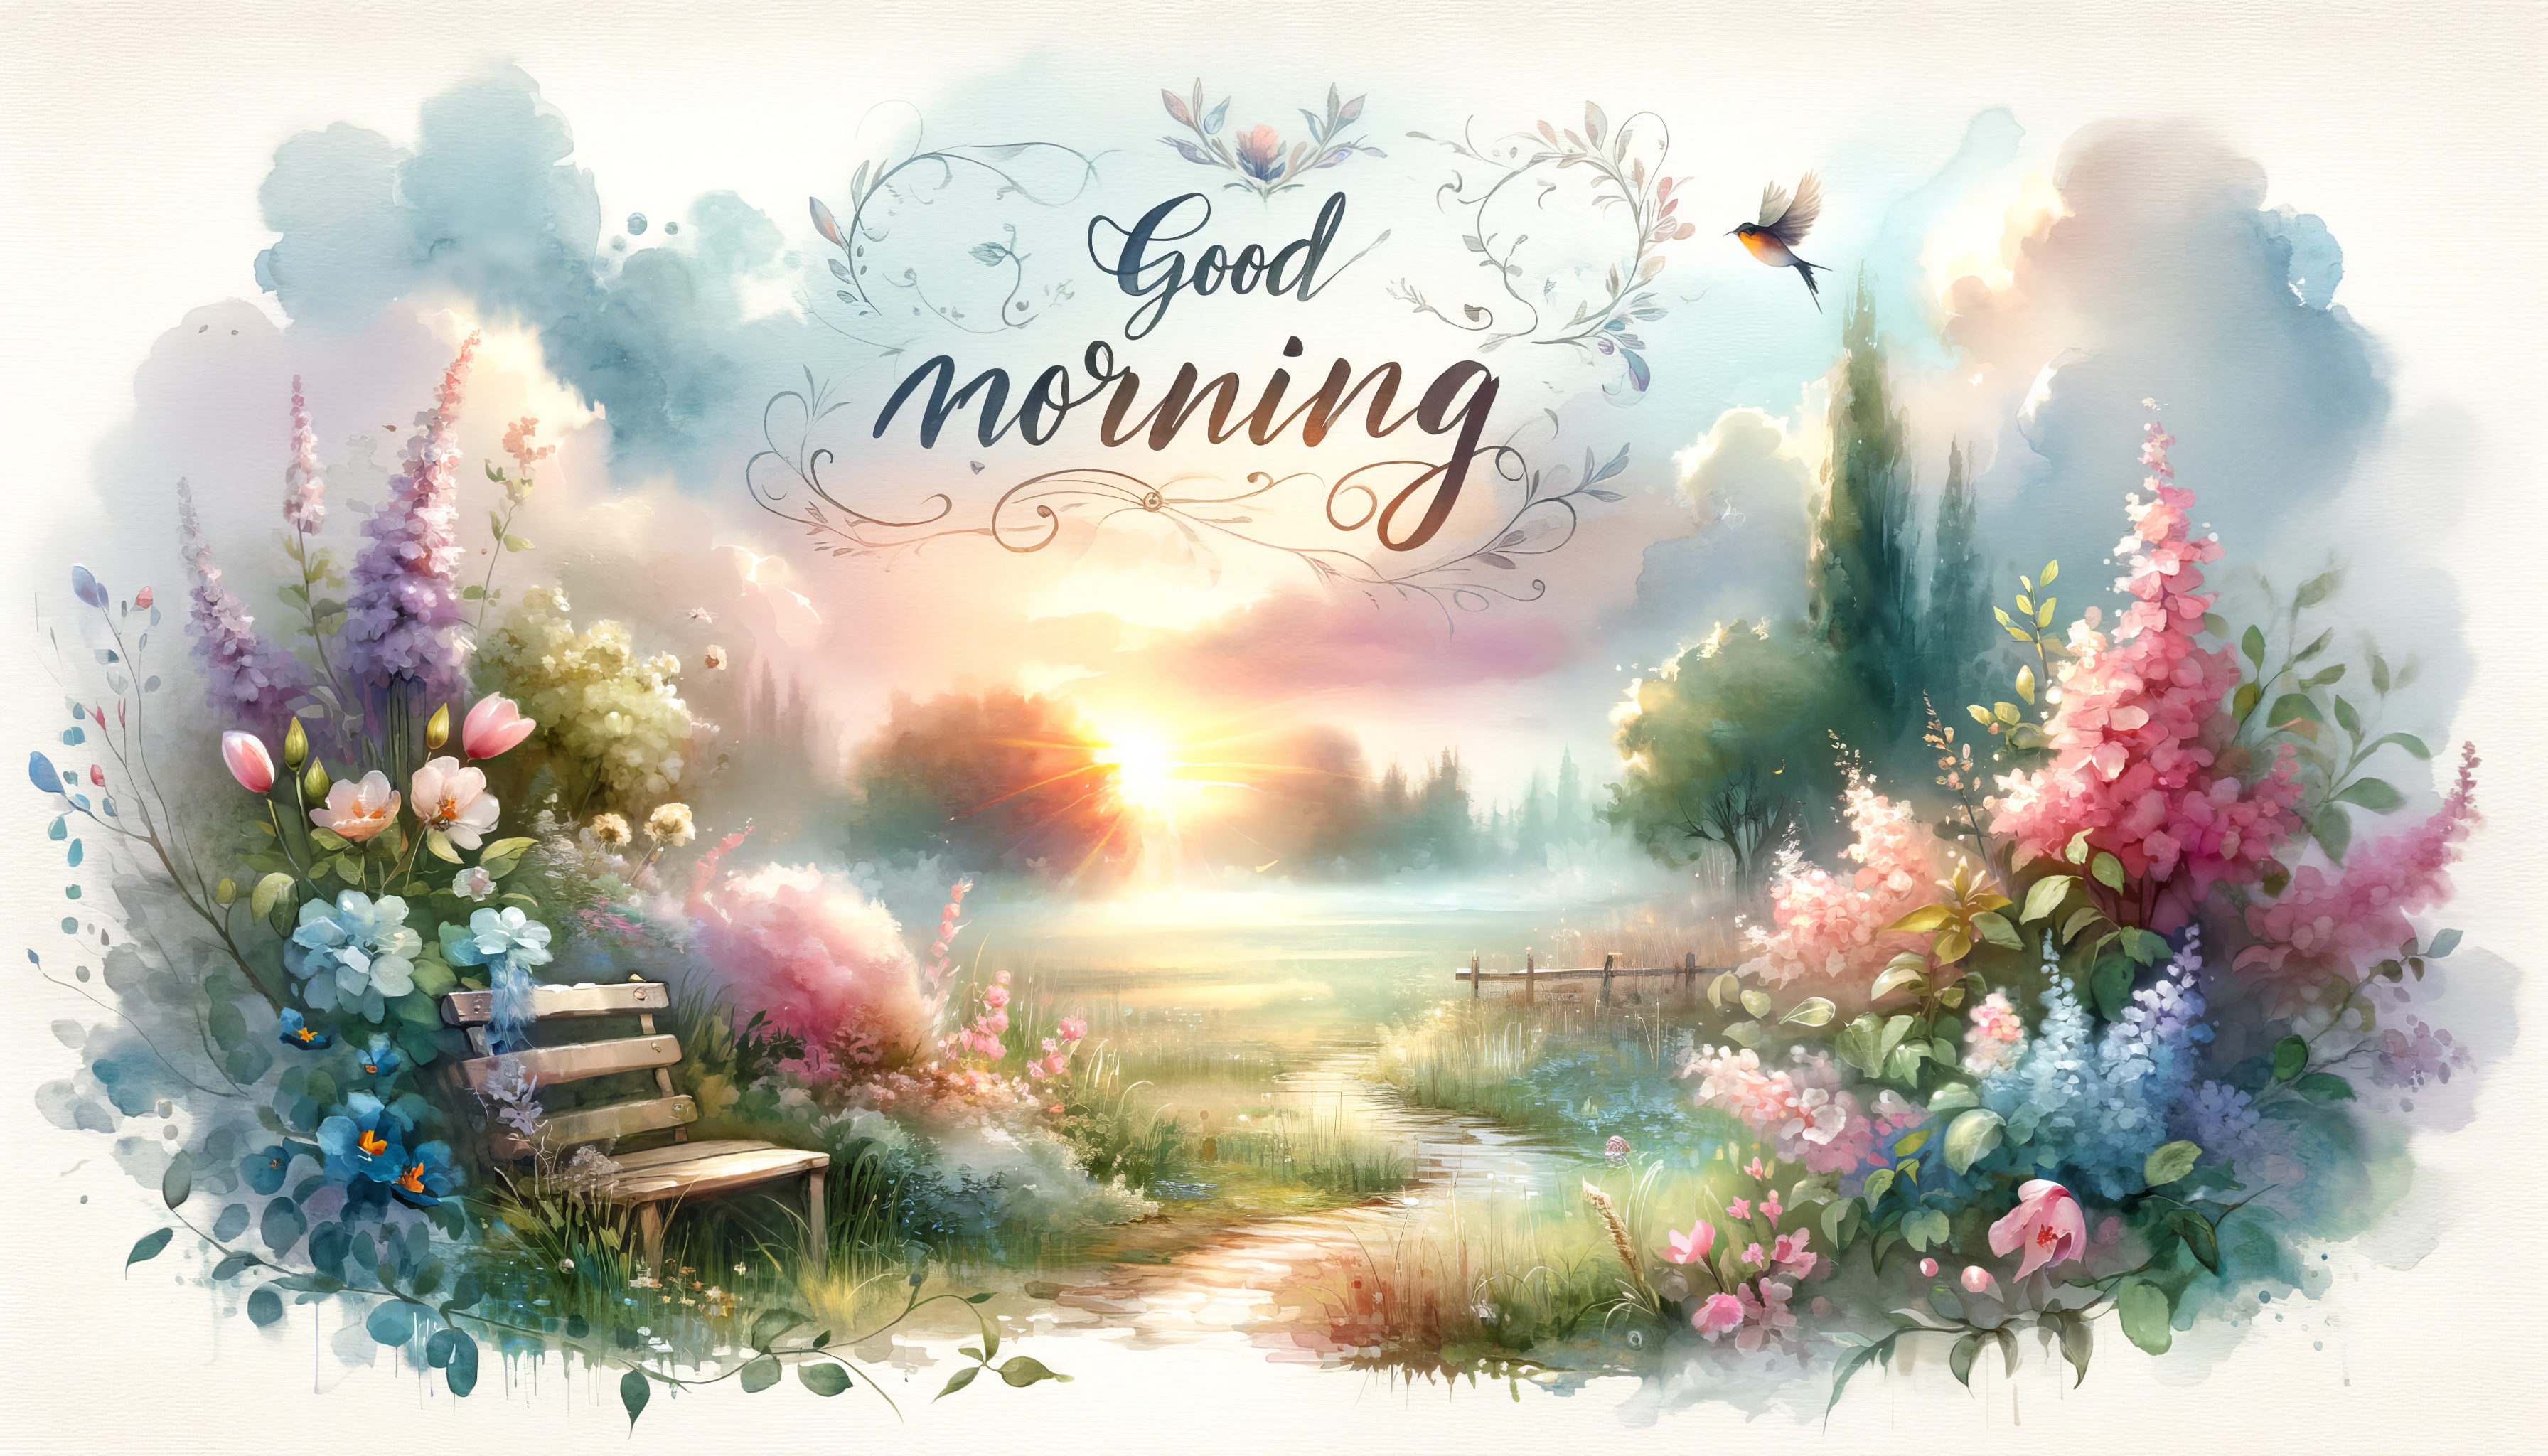 Alt Text: Good morning written in elegant script on a tranquil sunrise landscape HD wallpaper, featuring a wooden bench, blooming flowers, and a whimsical bird, perfect for a peaceful desktop background.